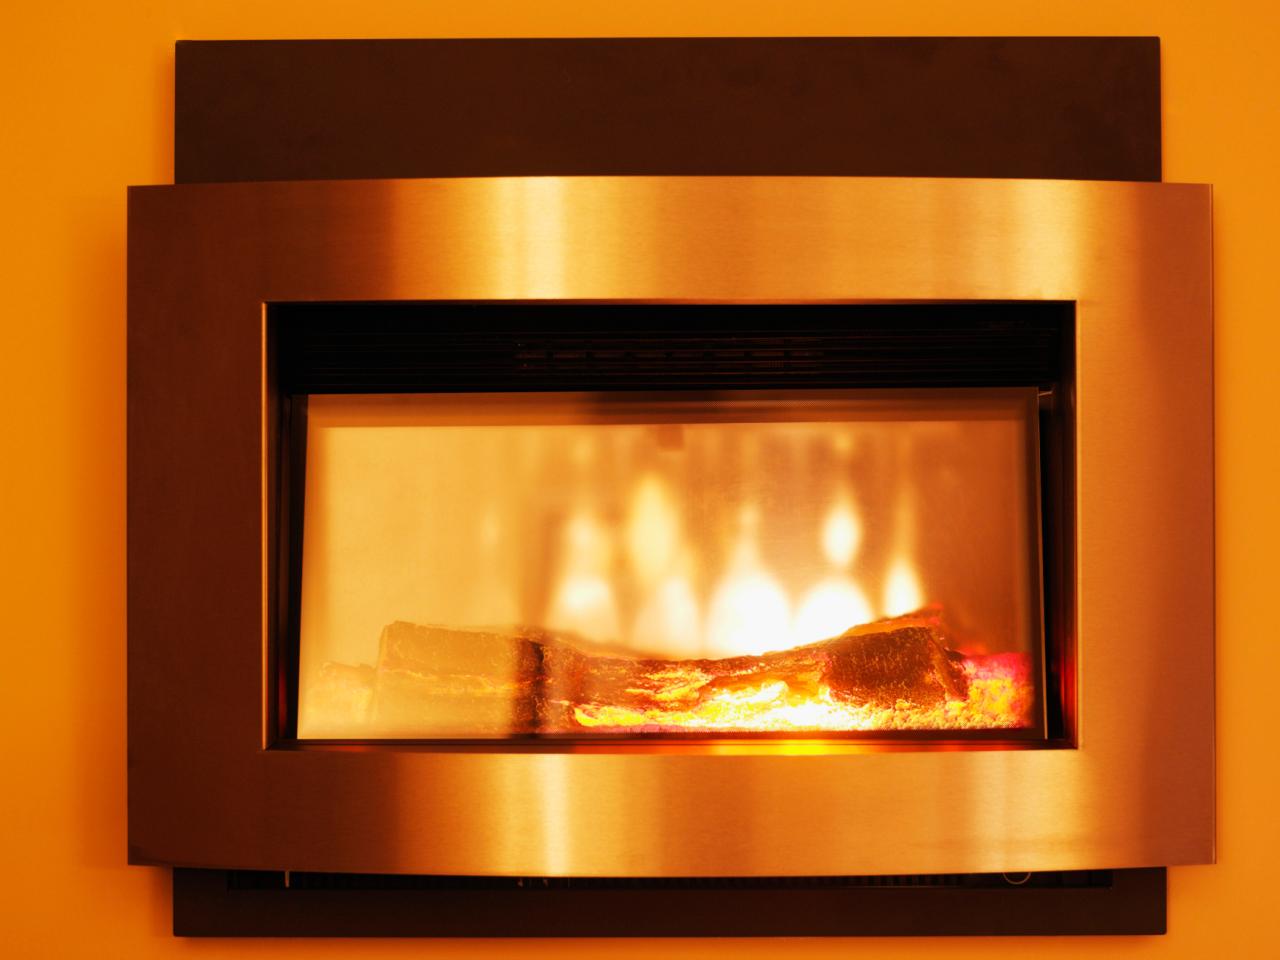 Gas Fireplaces Offer Efficient Heating, Gas Fireplace Room Heater